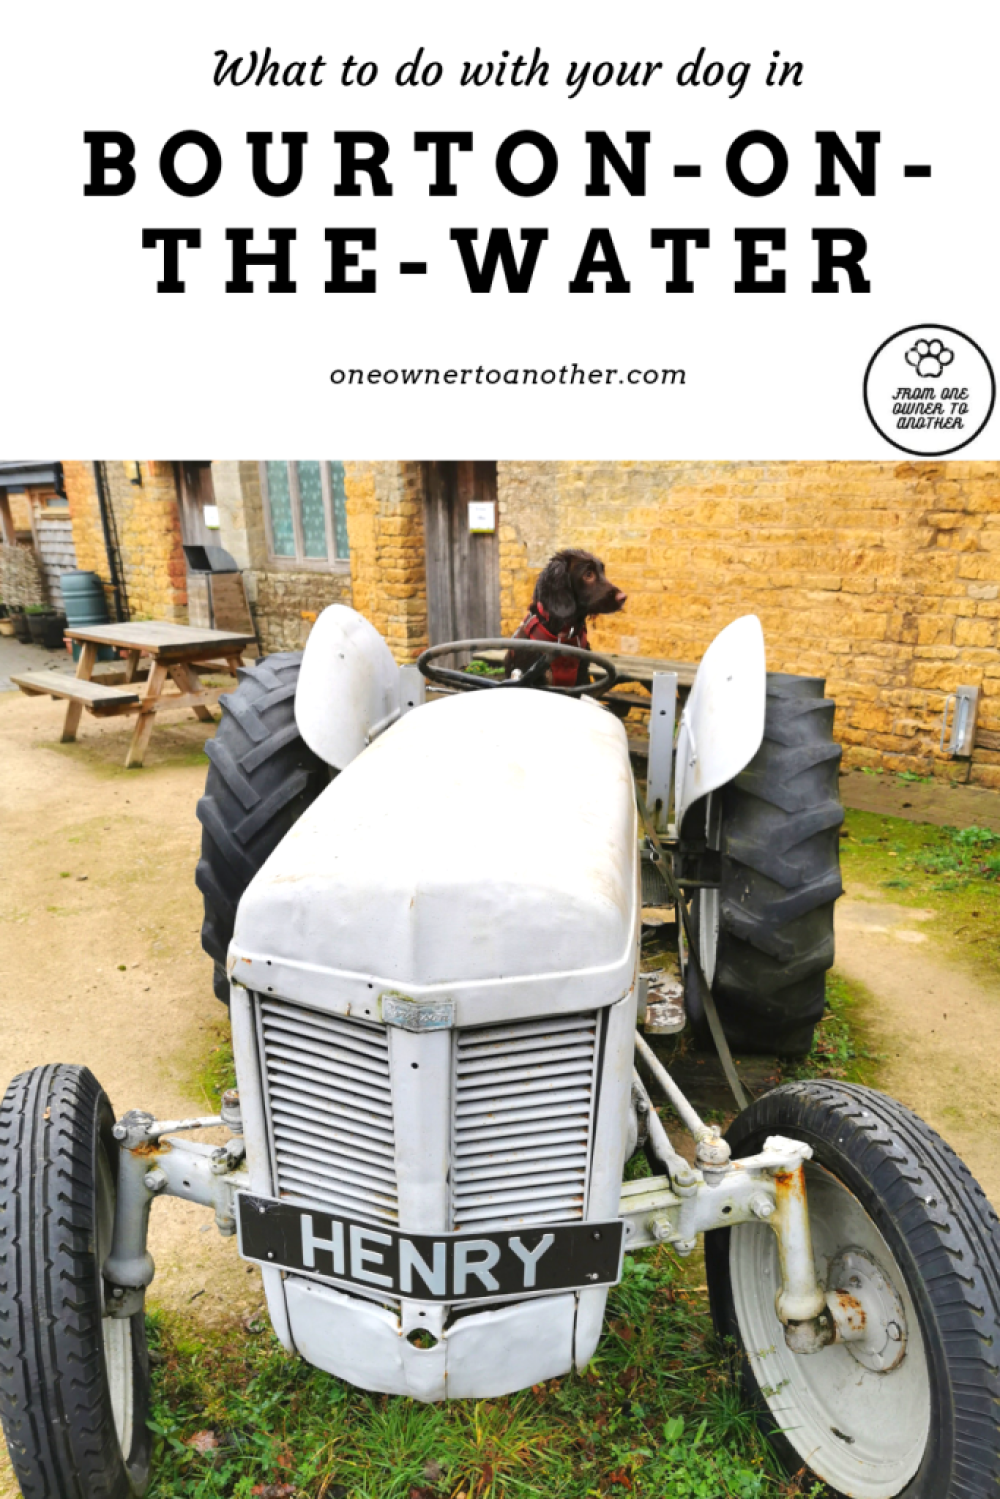 What to do with your dog in Bourton on the Water (the Cotswolds) by From One Owner to Another